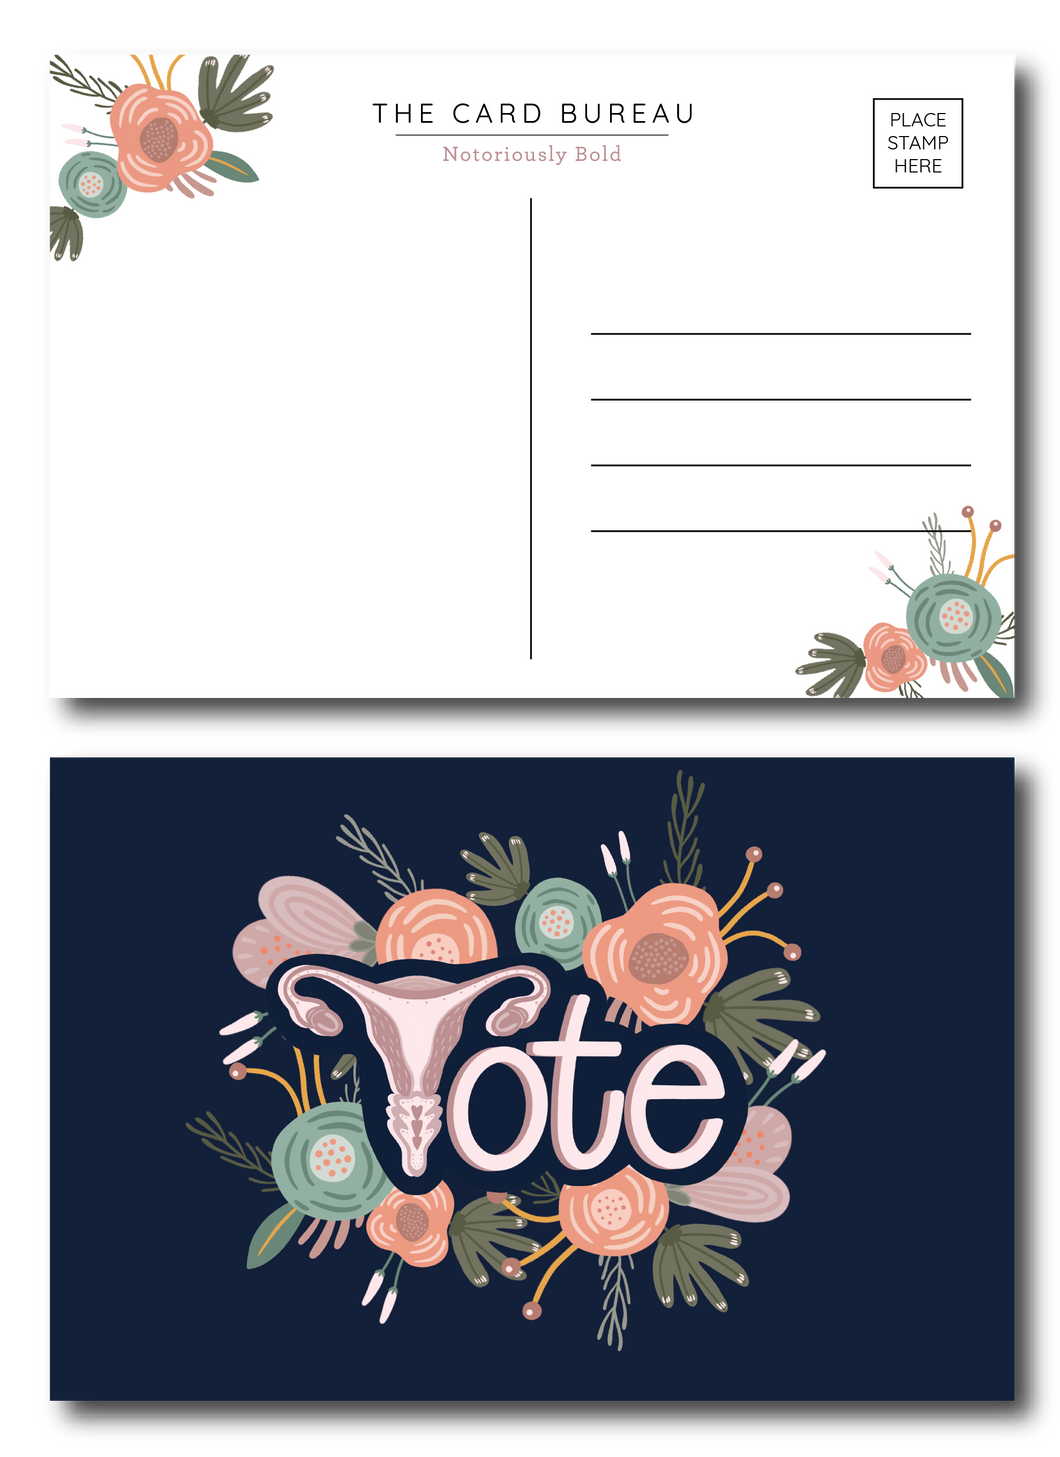 Abortion Rights Floral Vote Postcard